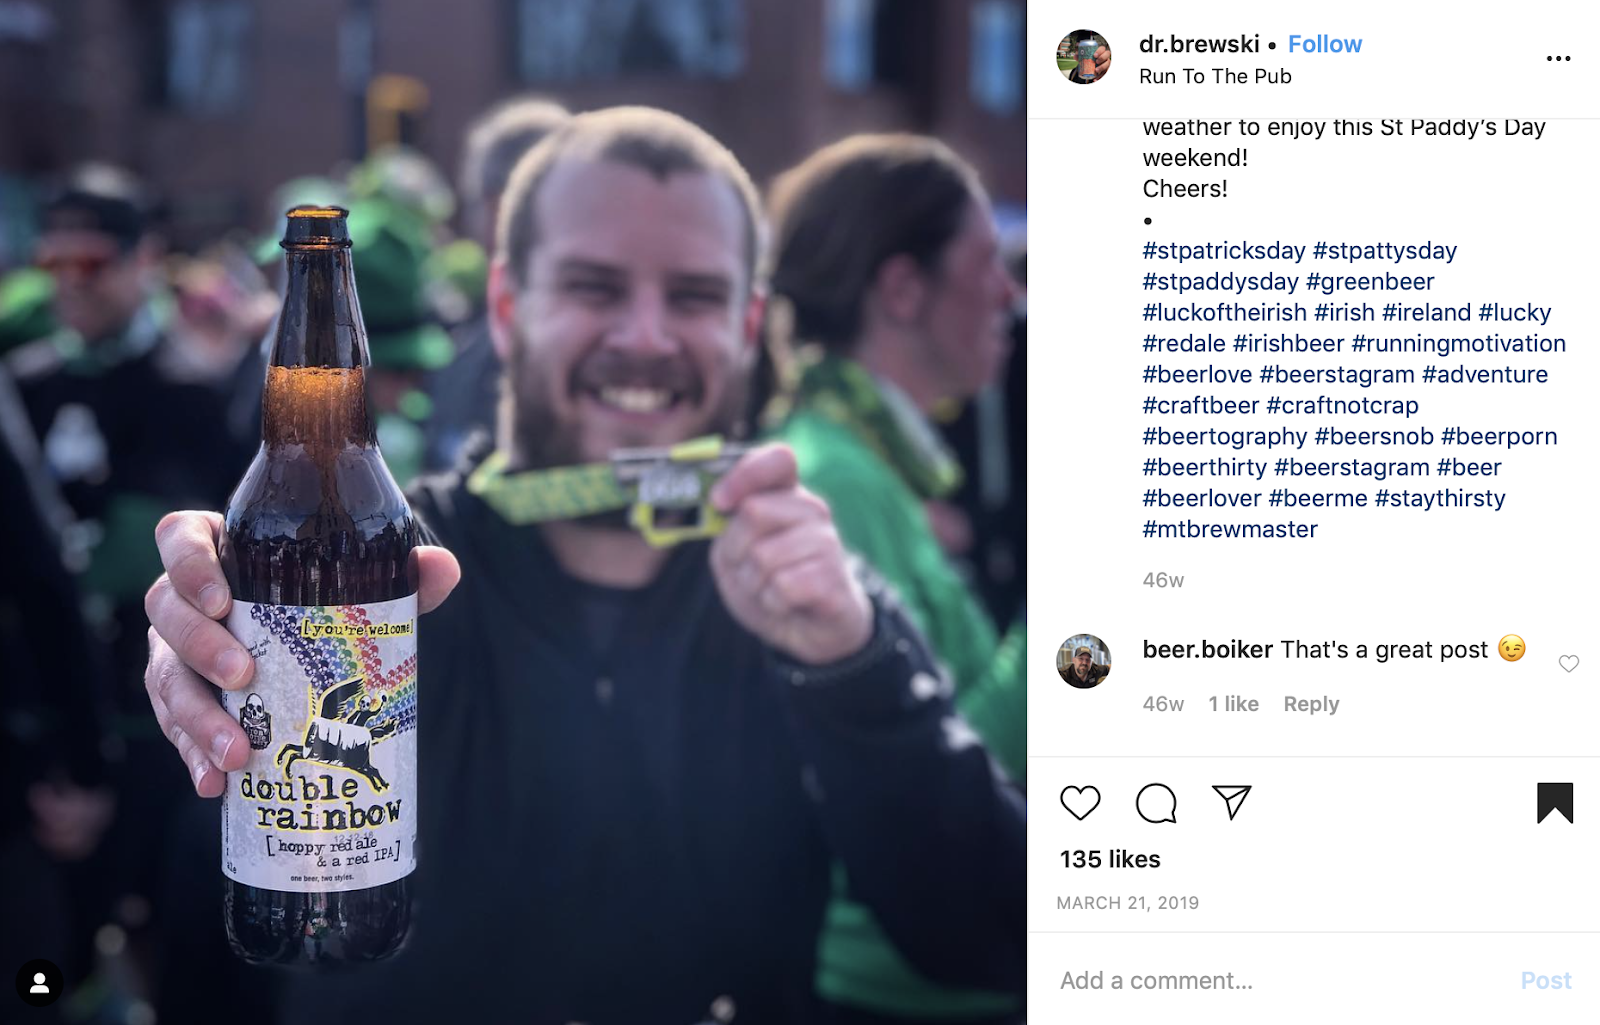 St. Patrick's Day influencer marketing ideas: the obvious product placement that looks cool anyway